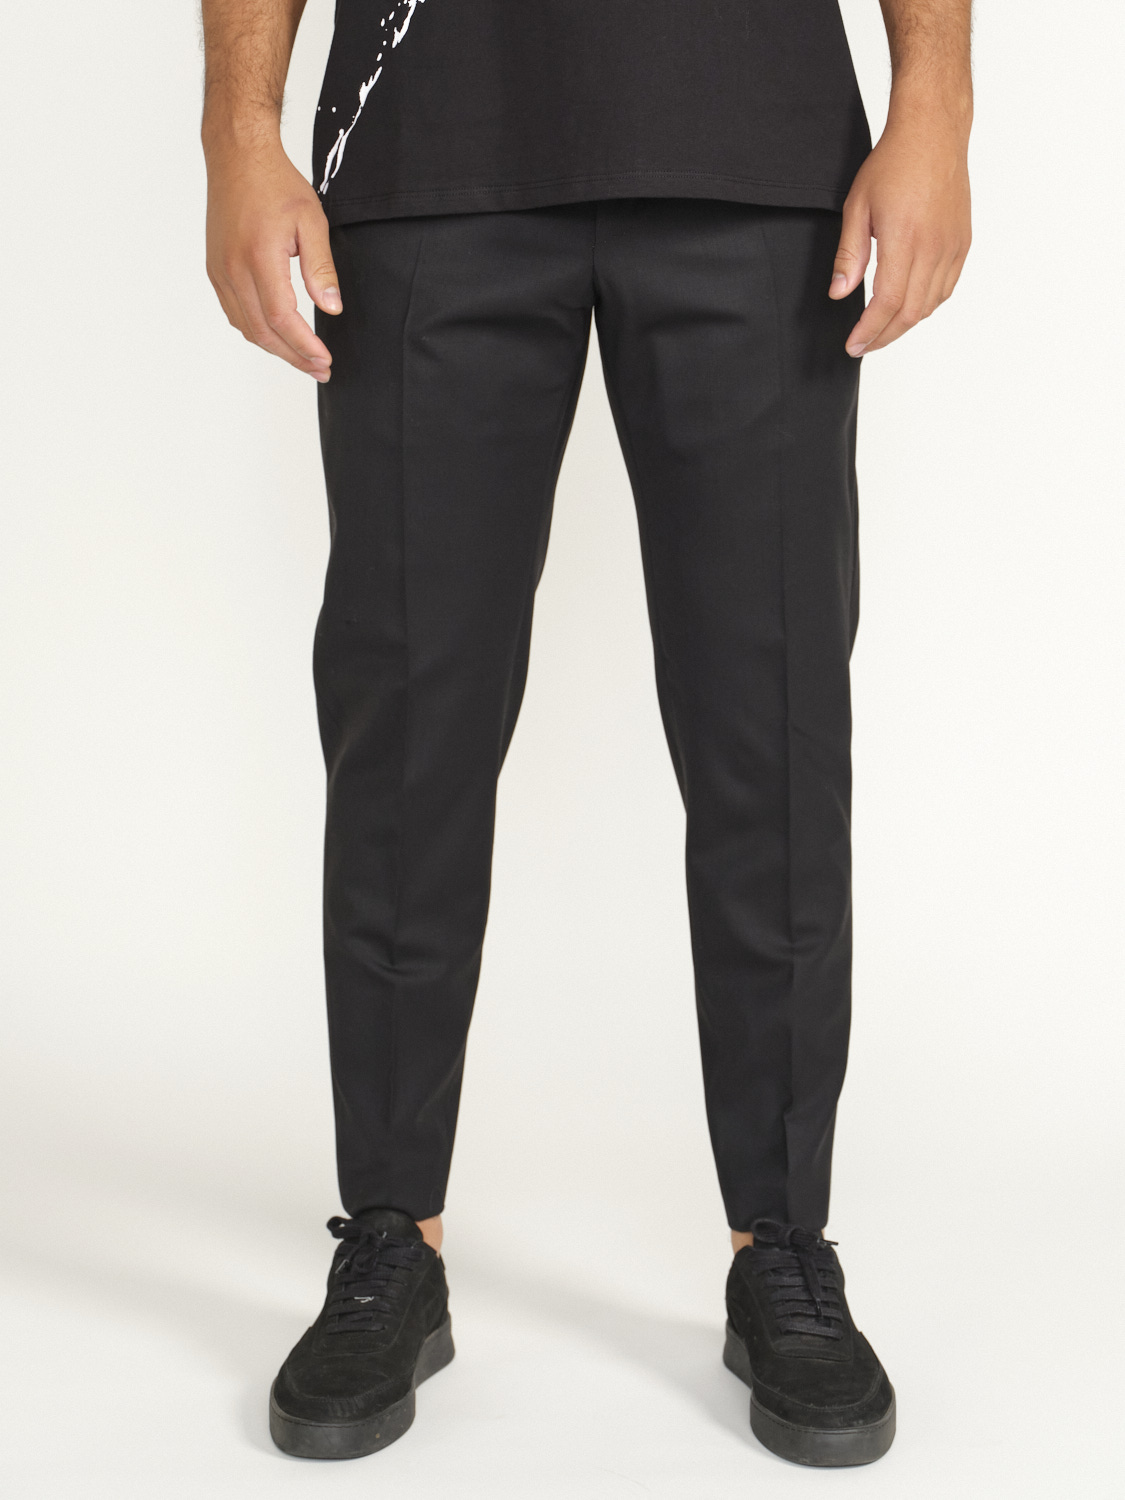 PT Torino Rebel - Suit trousers with crease  black 50